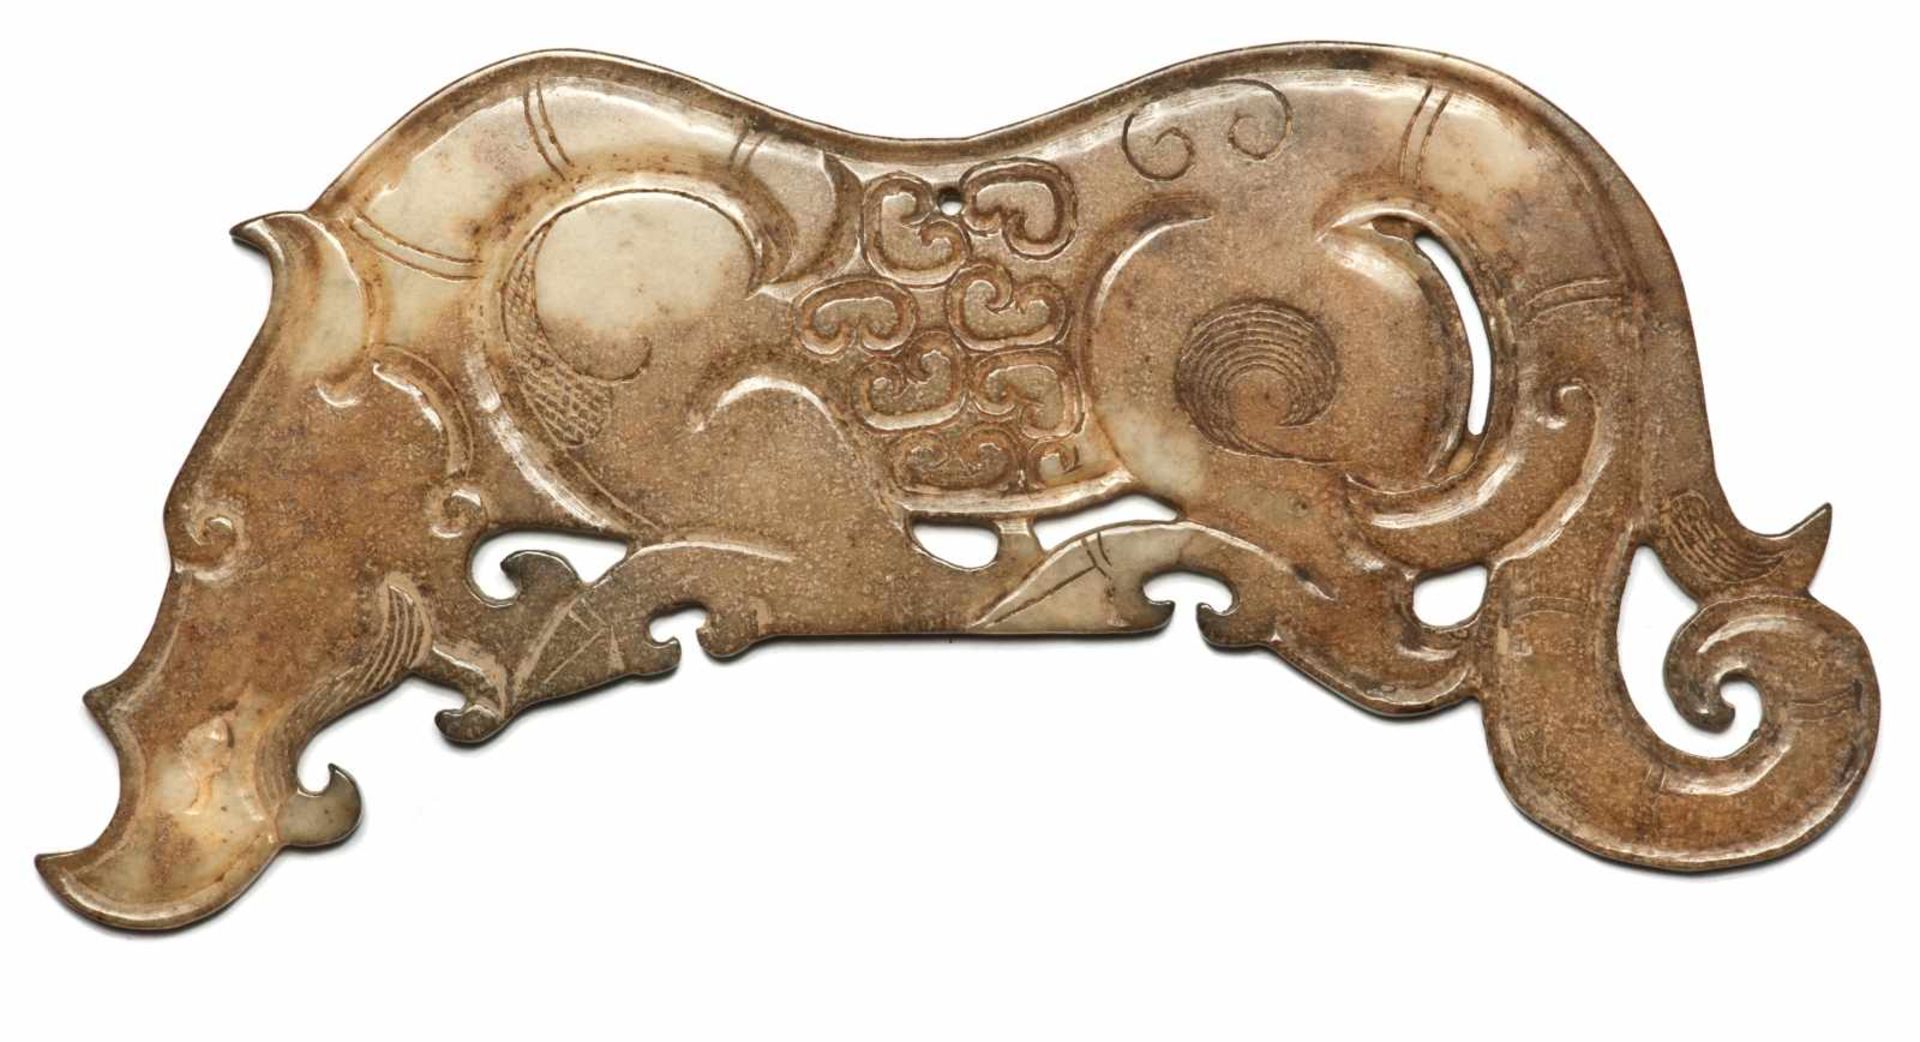 TIGER-SHAPED PENDANT This jade is published in Filippo Salviati 4000 YEARS OF CHINESE ARCHAIC